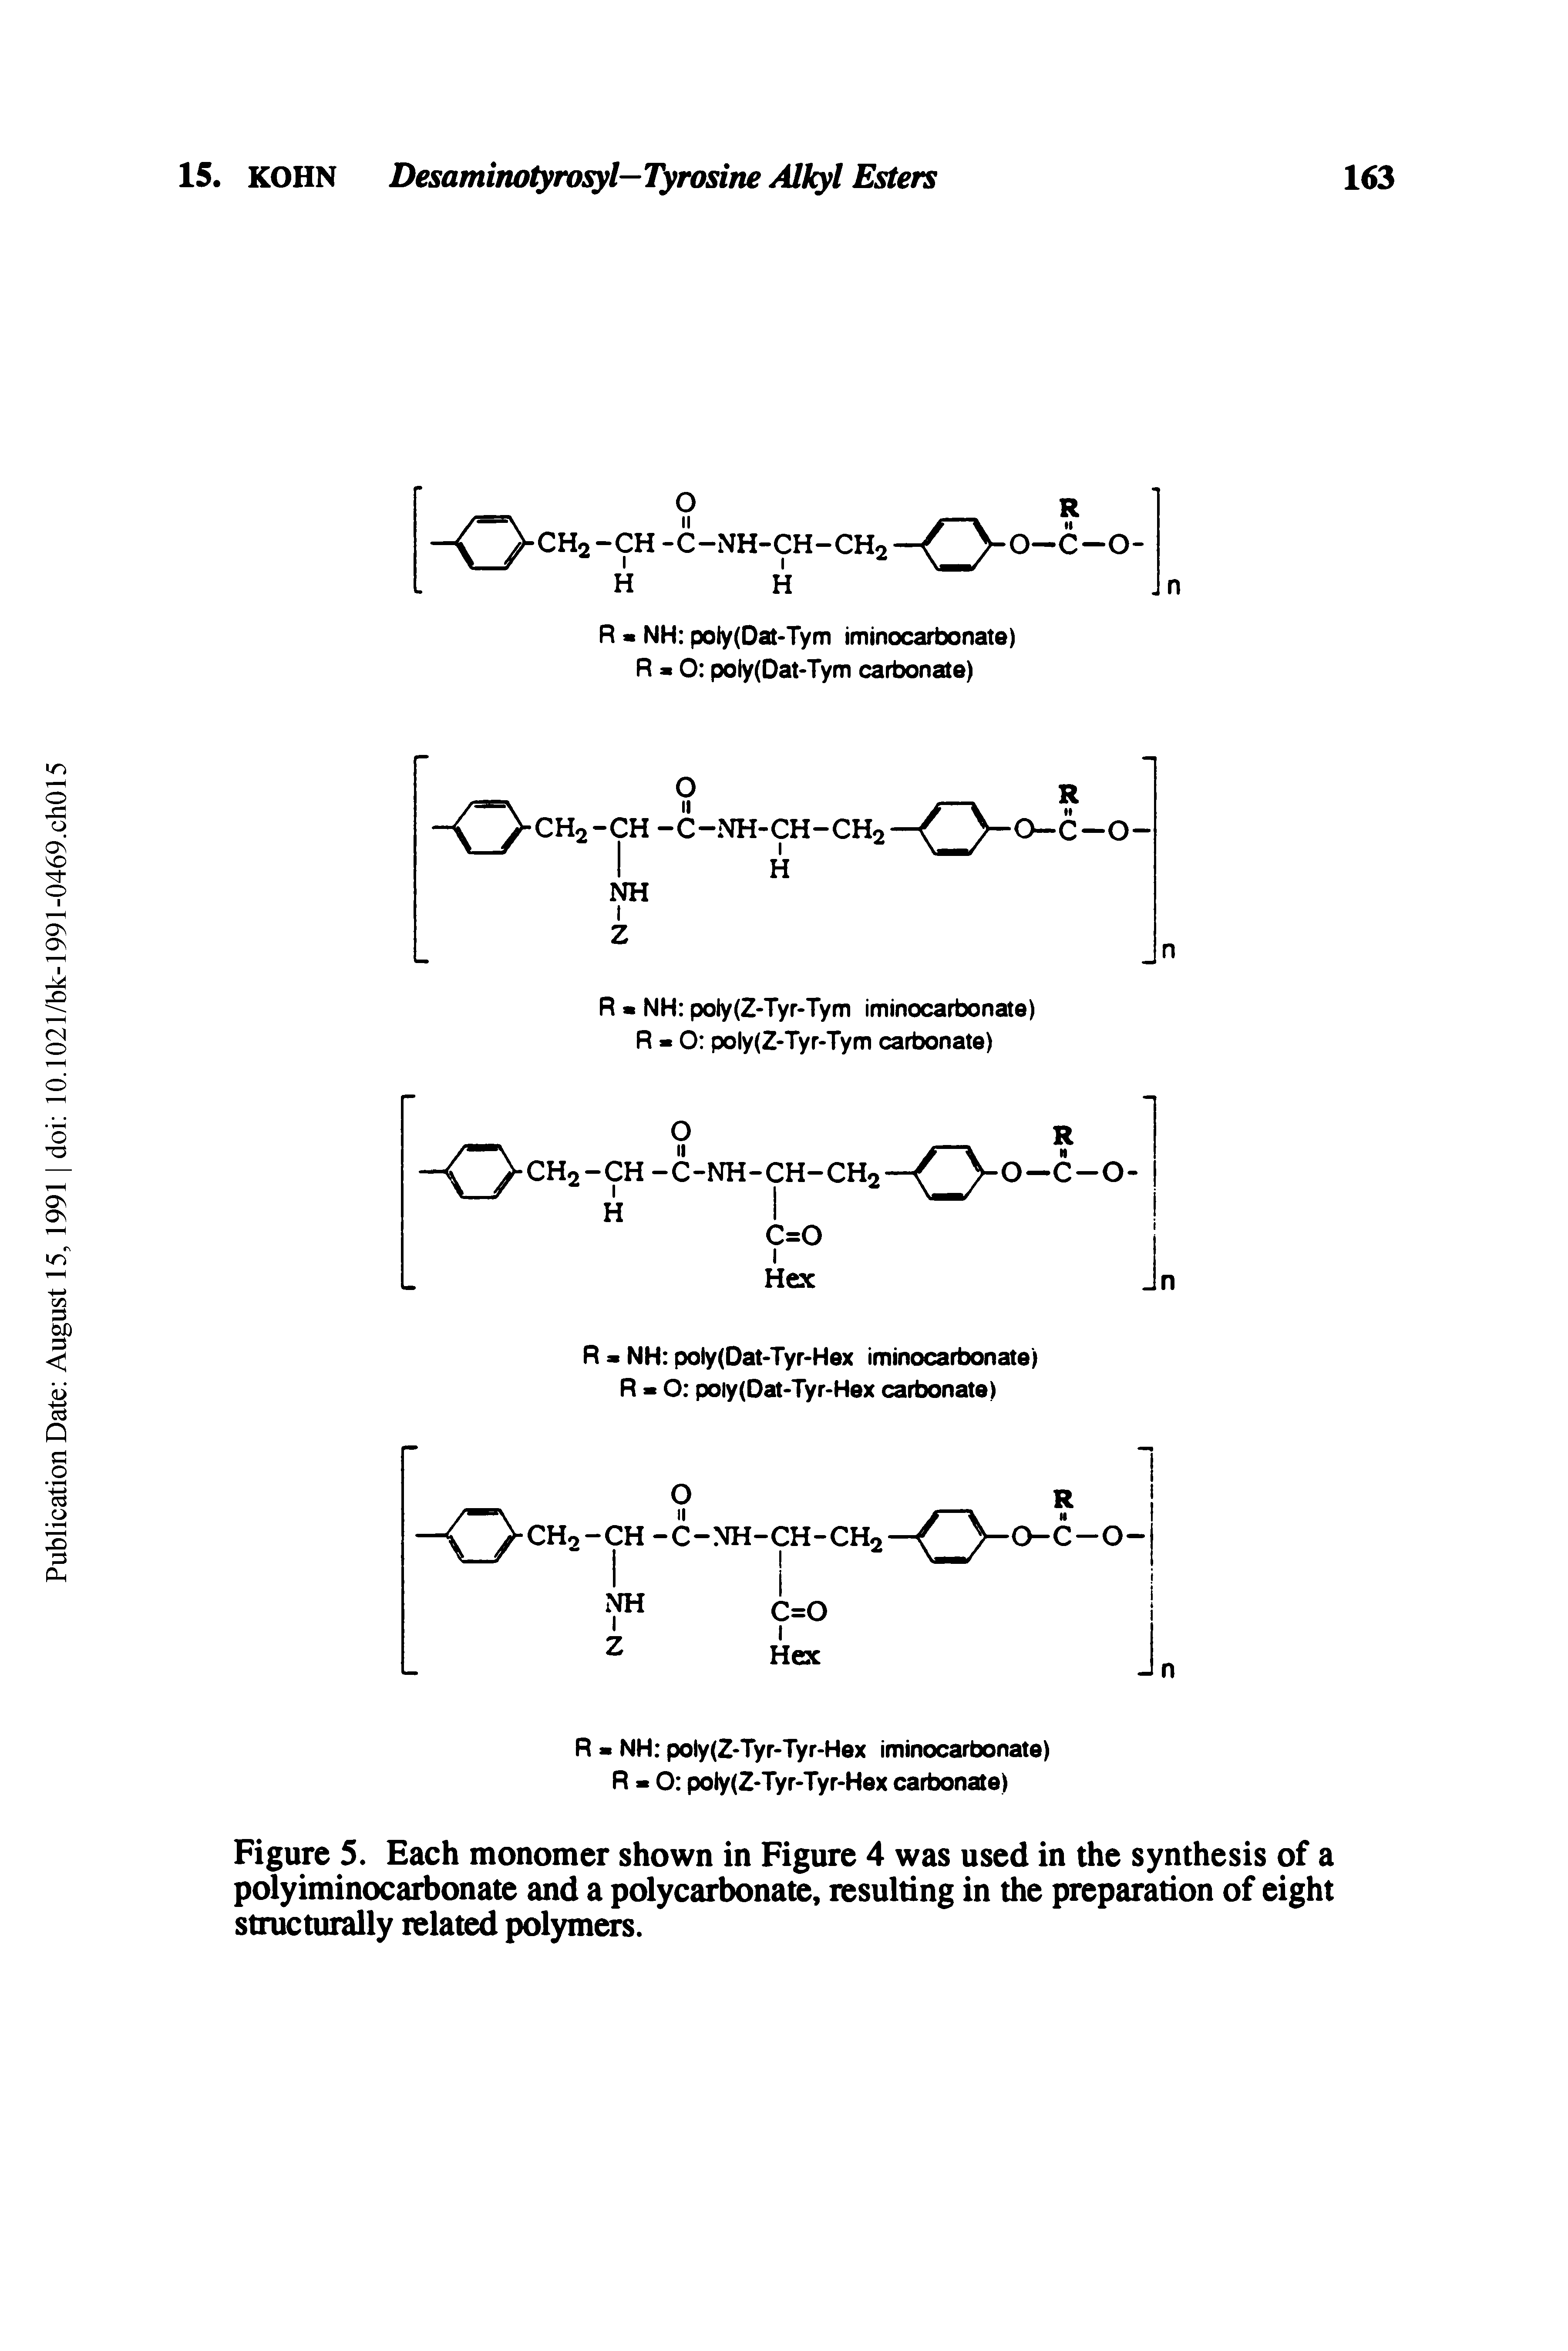 Figure 5. Each monomer shown in Figure 4 was used in the synthesis of a polyiminocarbonate and a polycarbonate, resulting in the preparation of eight structurally related polymers.